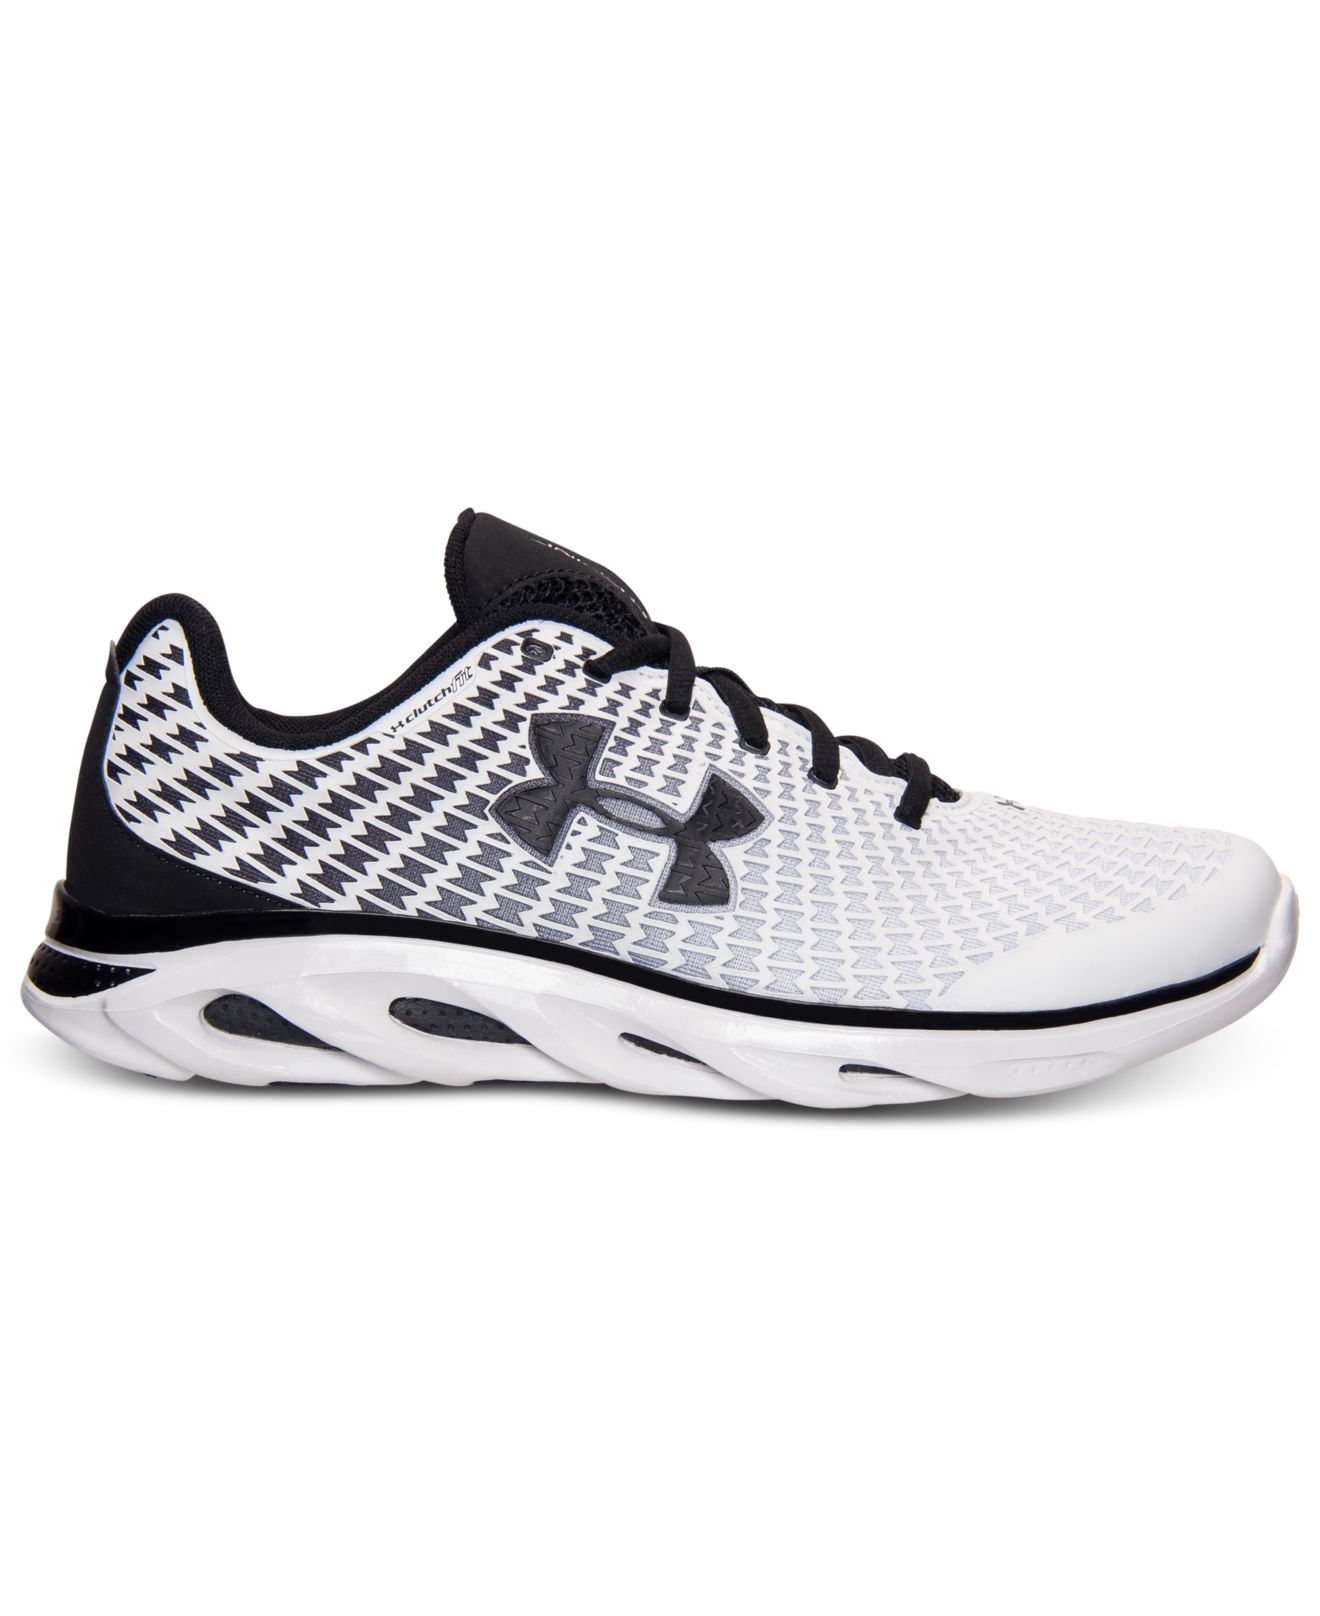 Under Armour Men'S Spine Clutchfit Running Sneakers From Finish Line In ...